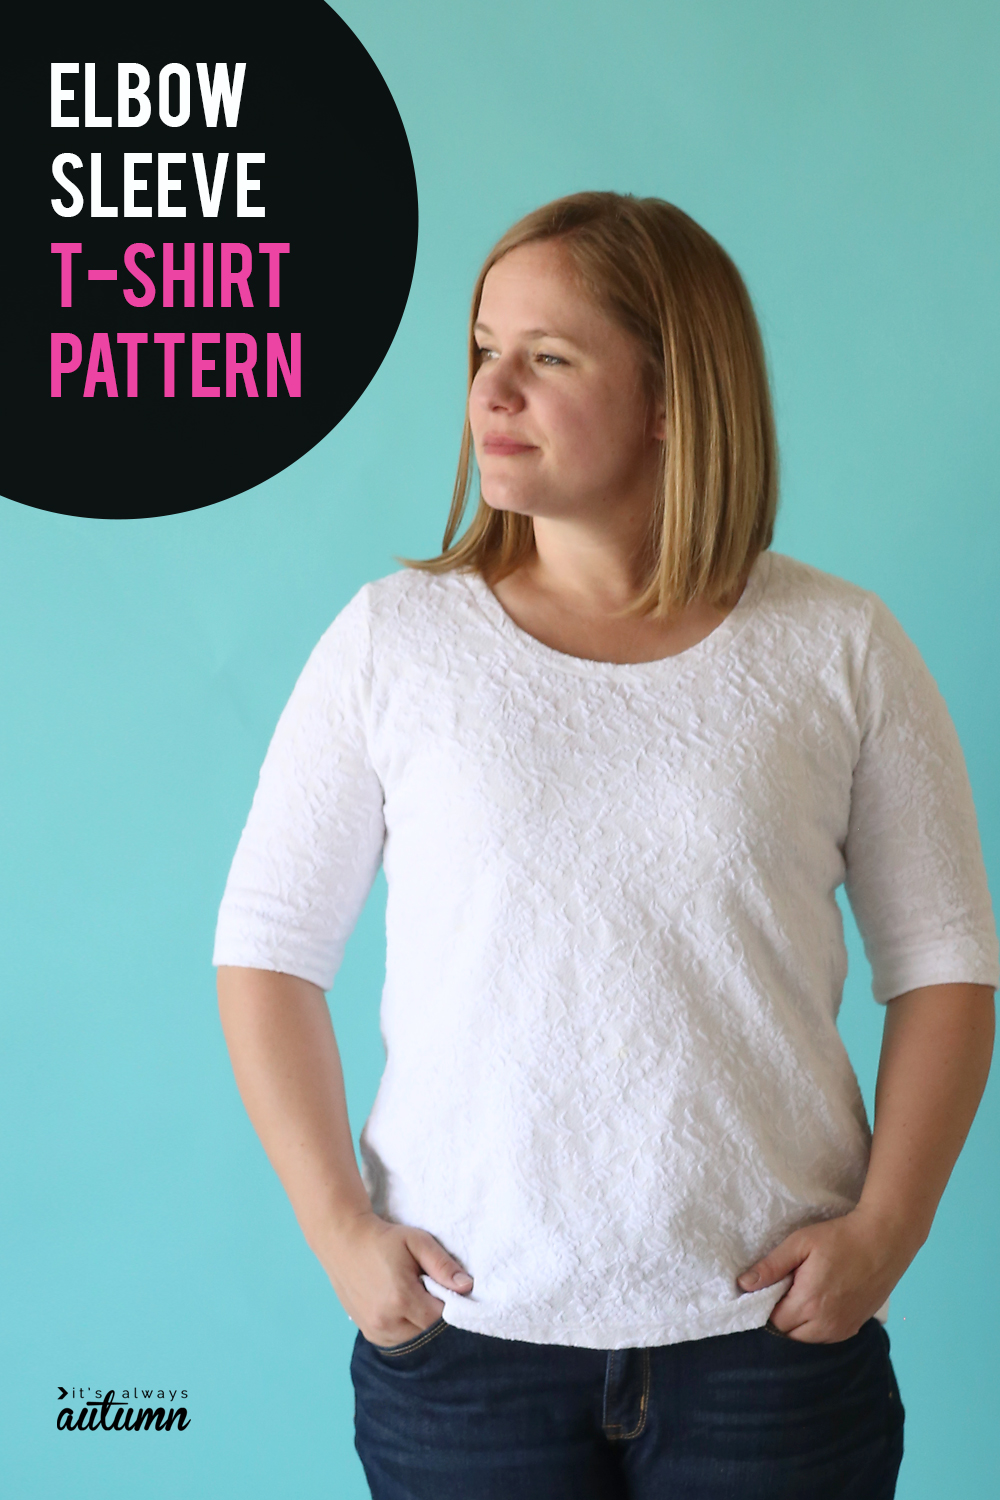 Learn how to sew a classic t-shirt with flattering elbow length sleeves with this sewing pattern and tutorial.